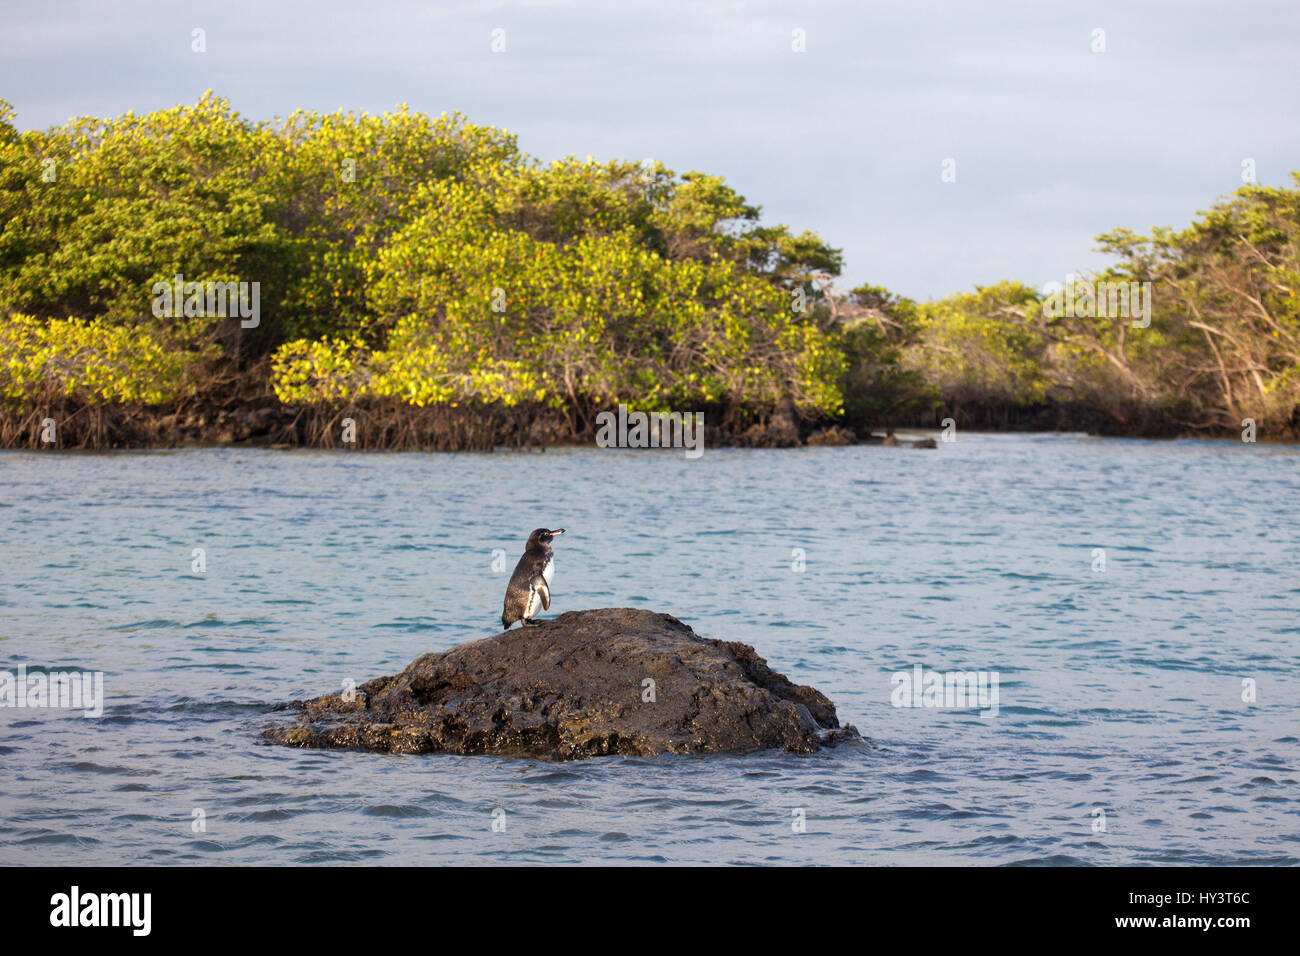 Galapagos Penguin (Spheniscus mendiculus) and coastal mangrove forest at a marine visitor site on Isabela Island in the Galapagos. Endangered species. Stock Photo